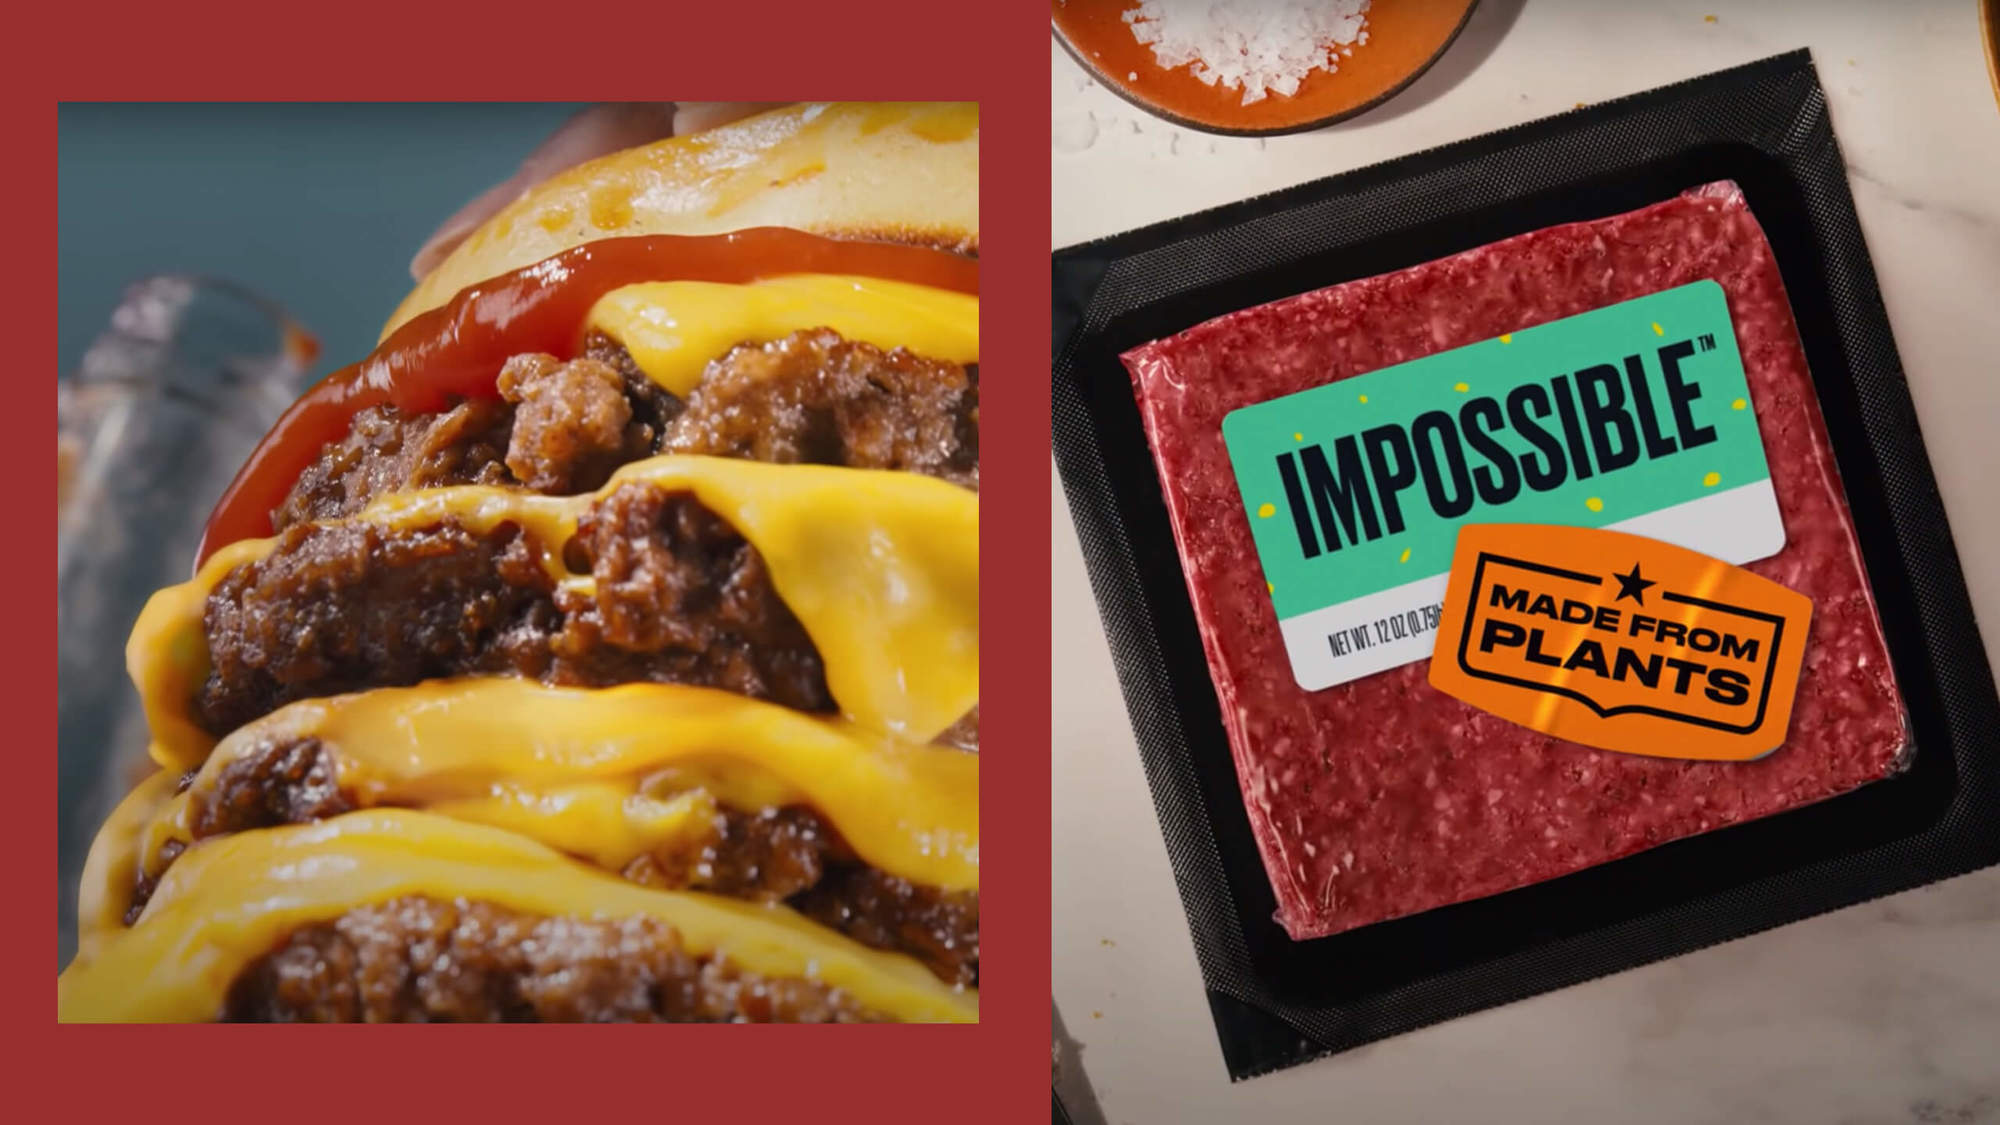 The impossible foods are prepared by plants based on plants with the first flavor next week